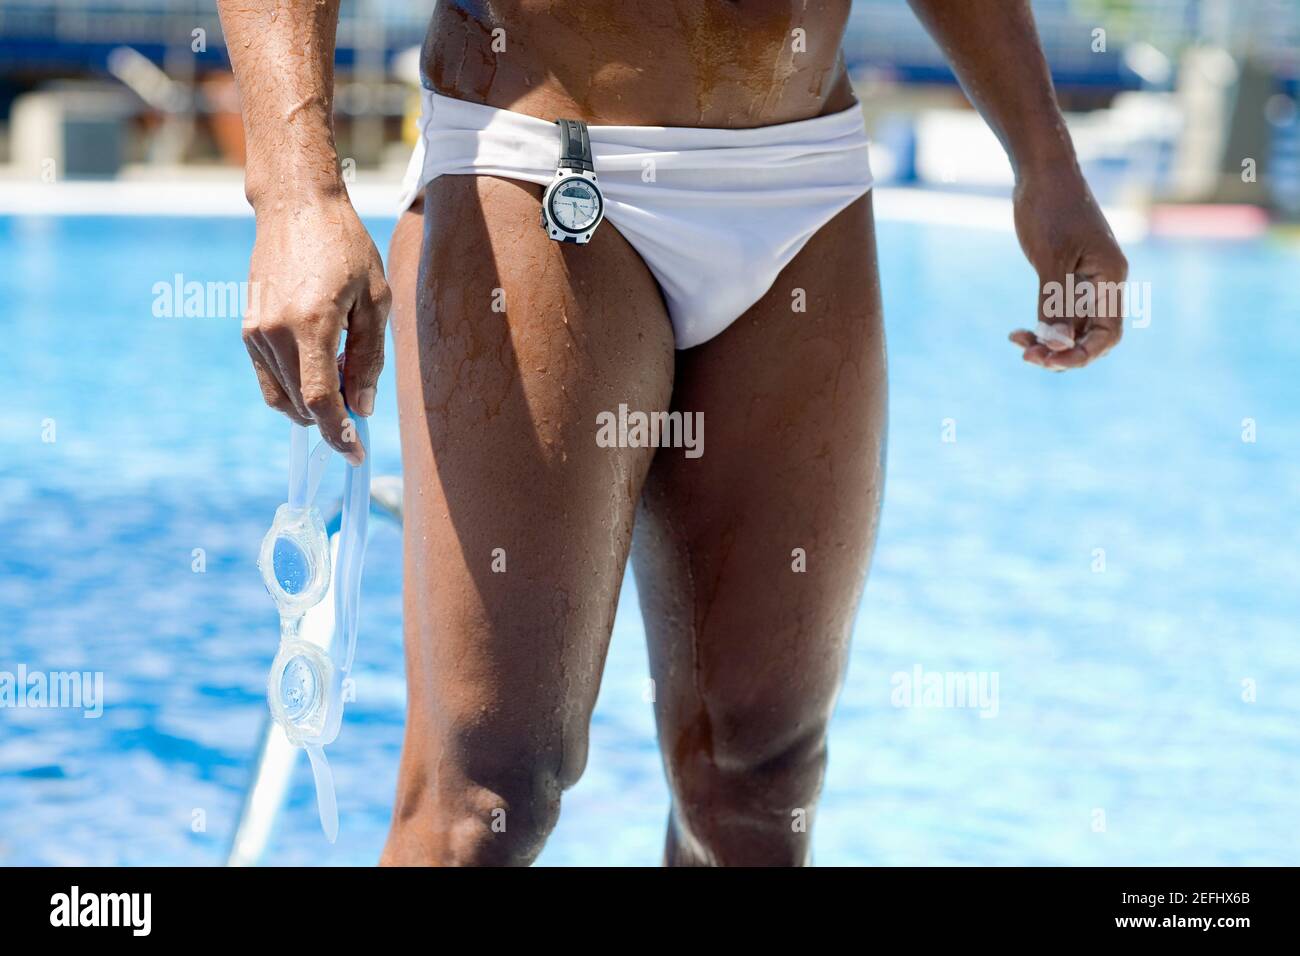 Mid section view of a man holding swimming goggles and standing at the poolside Stock Photo